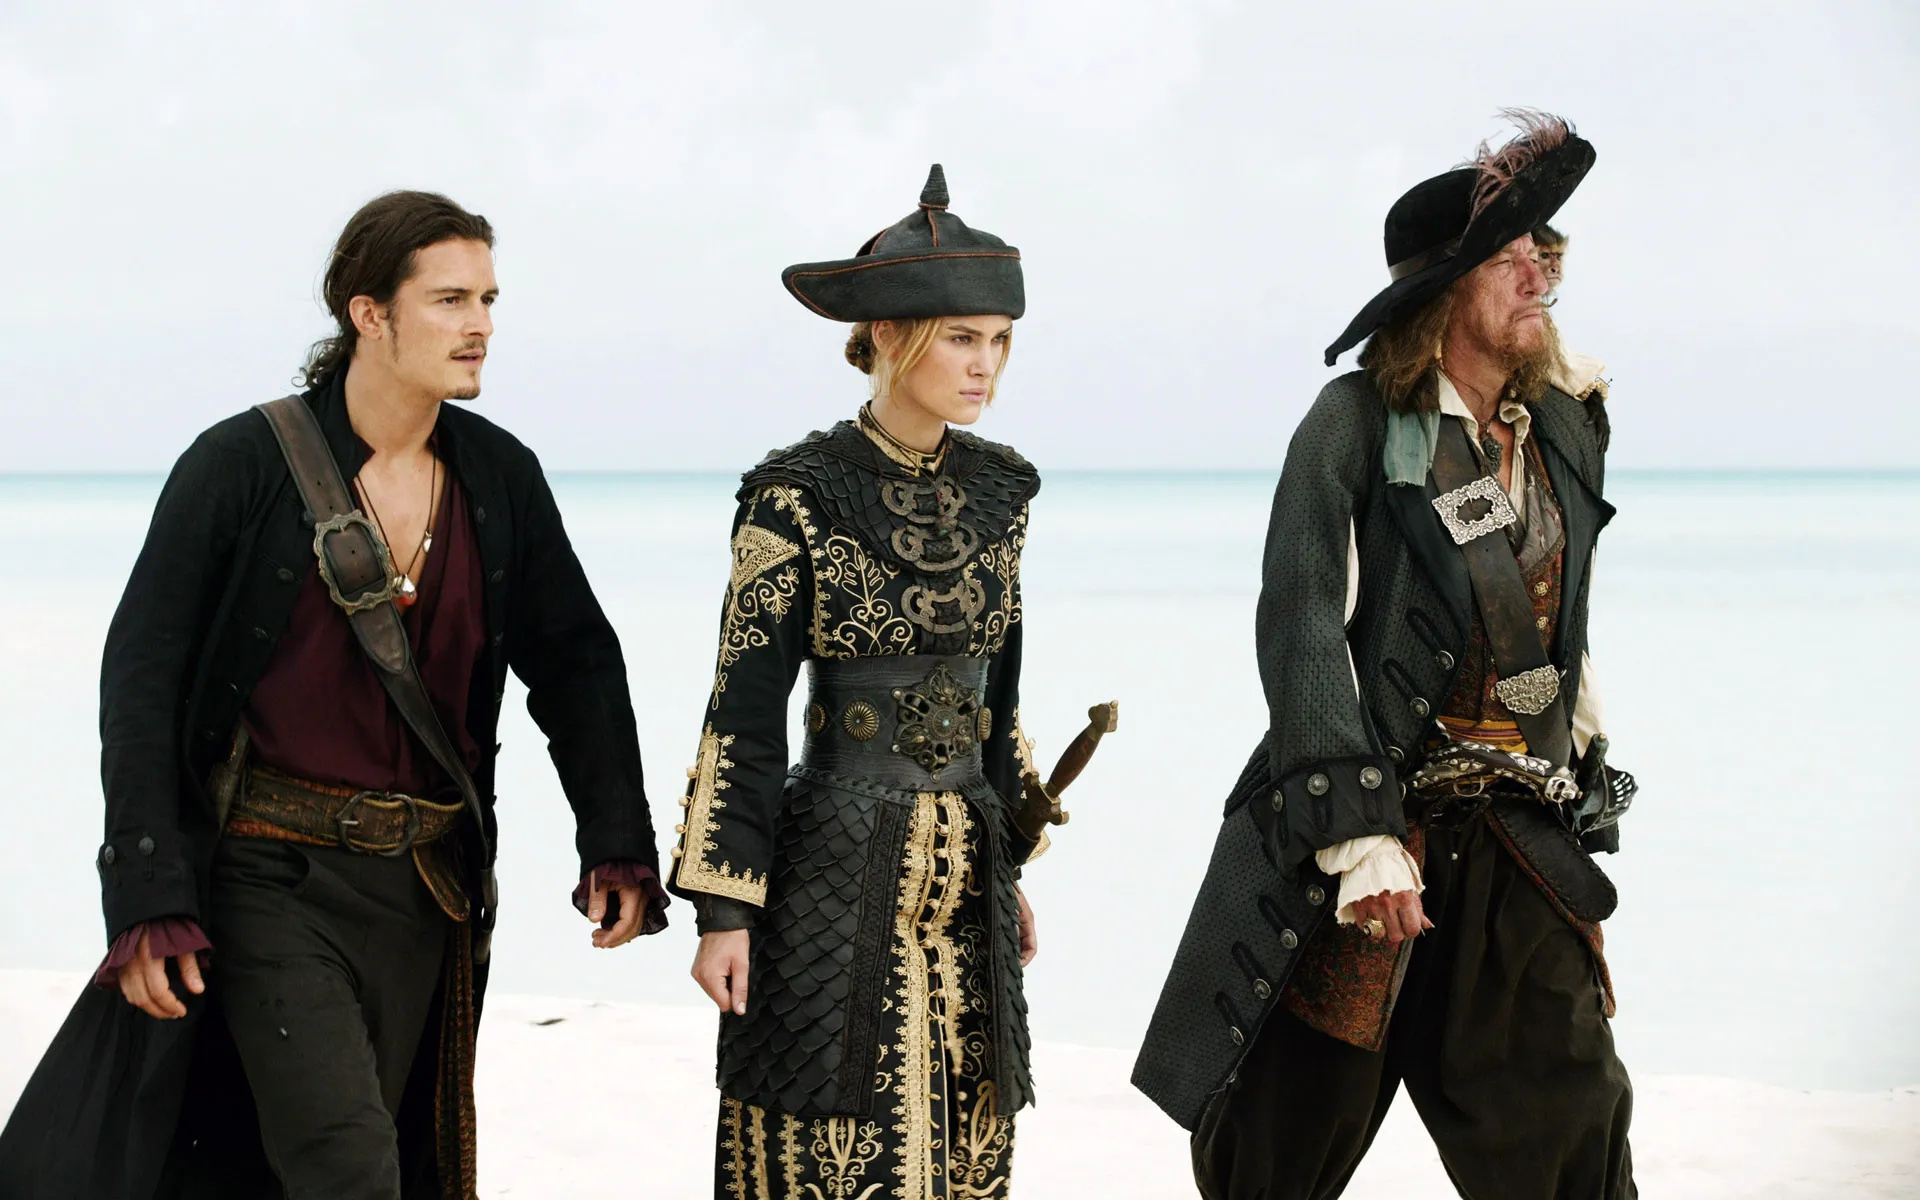 Will Turner, Pirates of the Caribbean, trilogy wallpapers, movie wallpapers, 1920x1200 HD Desktop